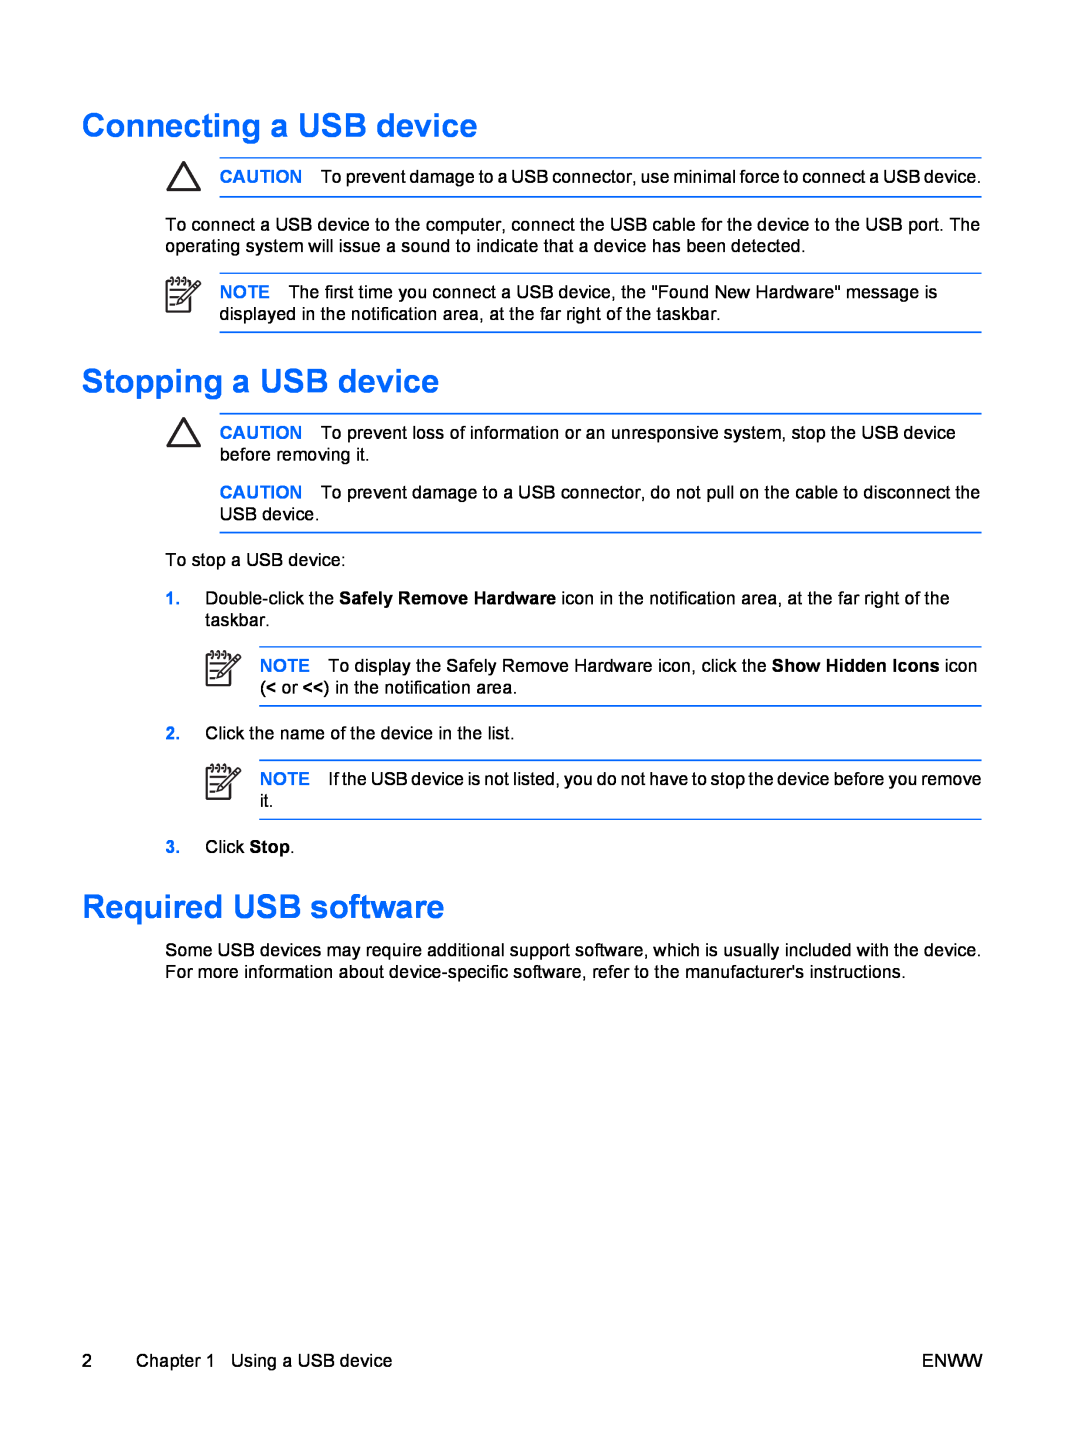 HP V6101XX, V6110US, V6115EU, V6109AU, V6109OM, V6107US Connecting a USB device, Stopping a USB device, Required USB software 